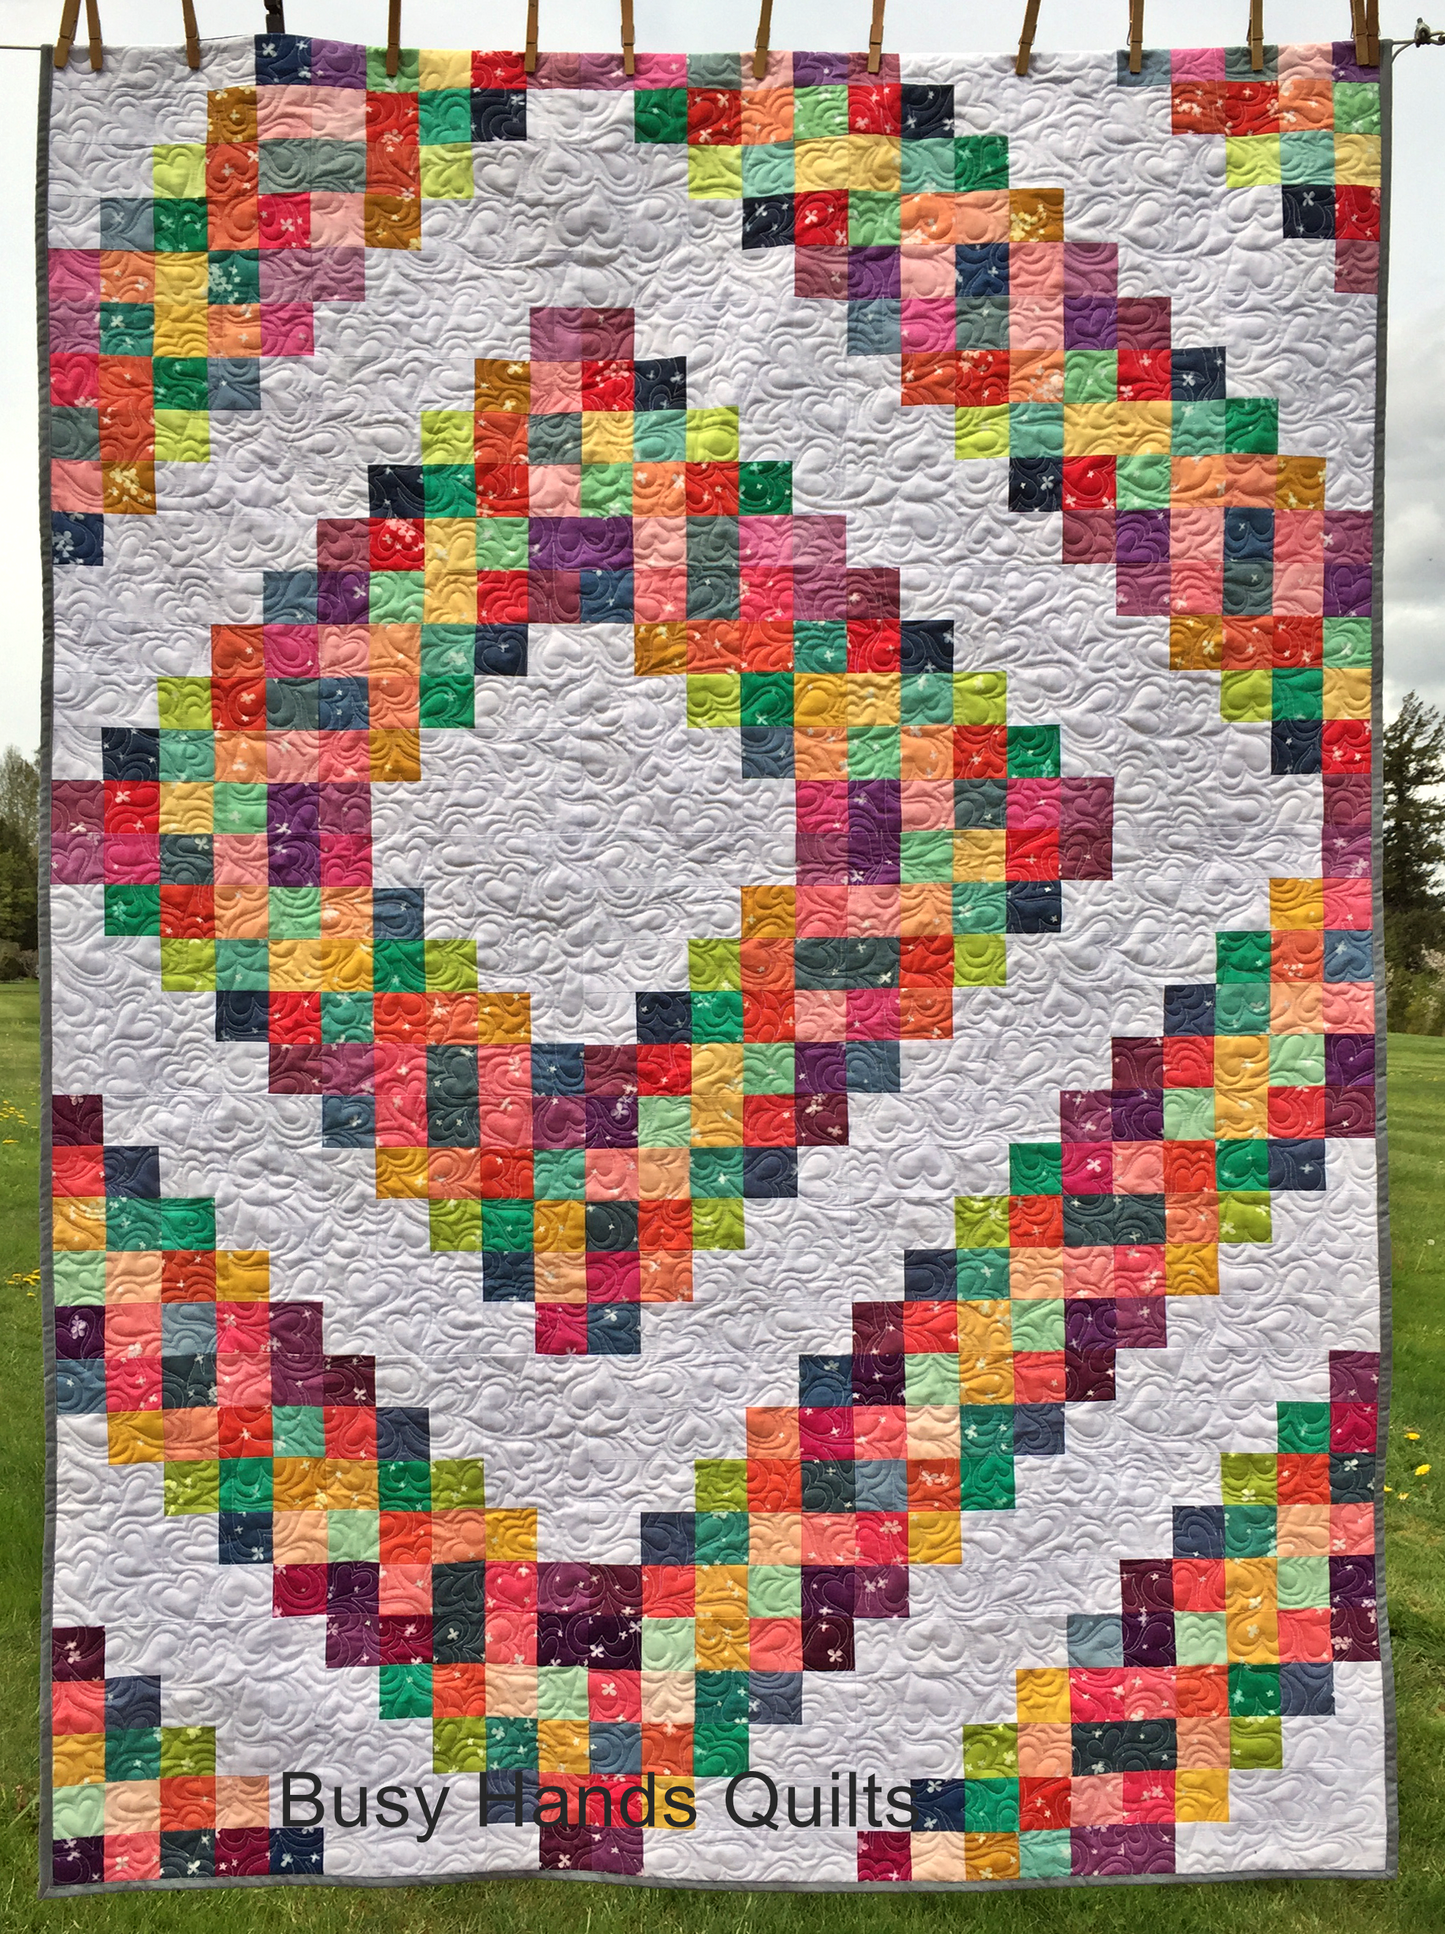 Grandpa's Barn Quilt Pattern PDF DOWNLOAD Busy Hands Quilts $12.99